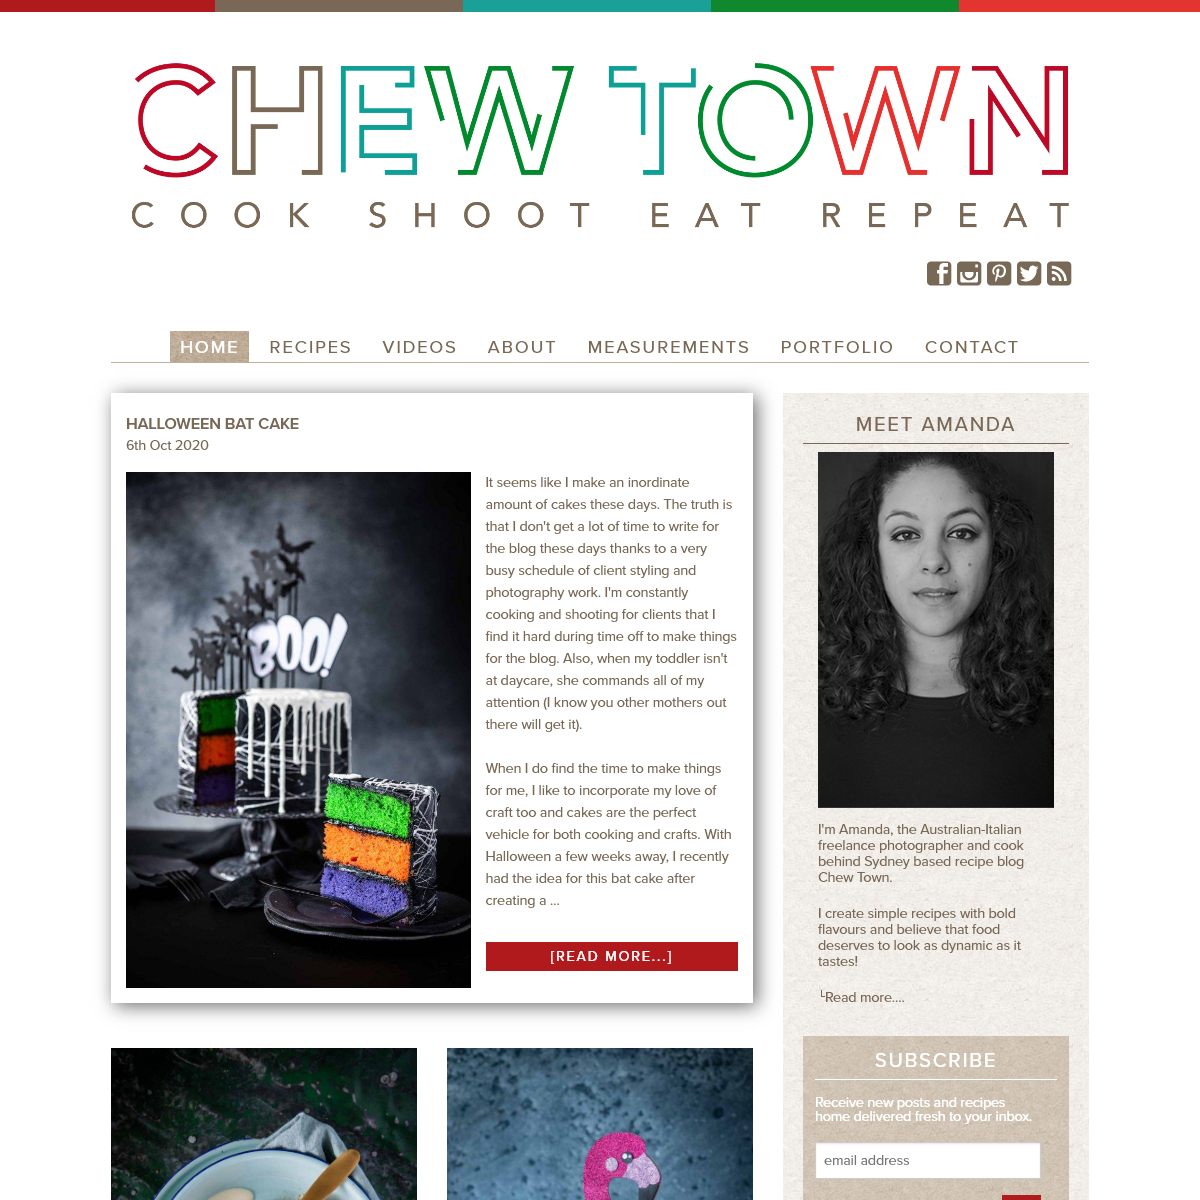 A complete backup of chewtown.com